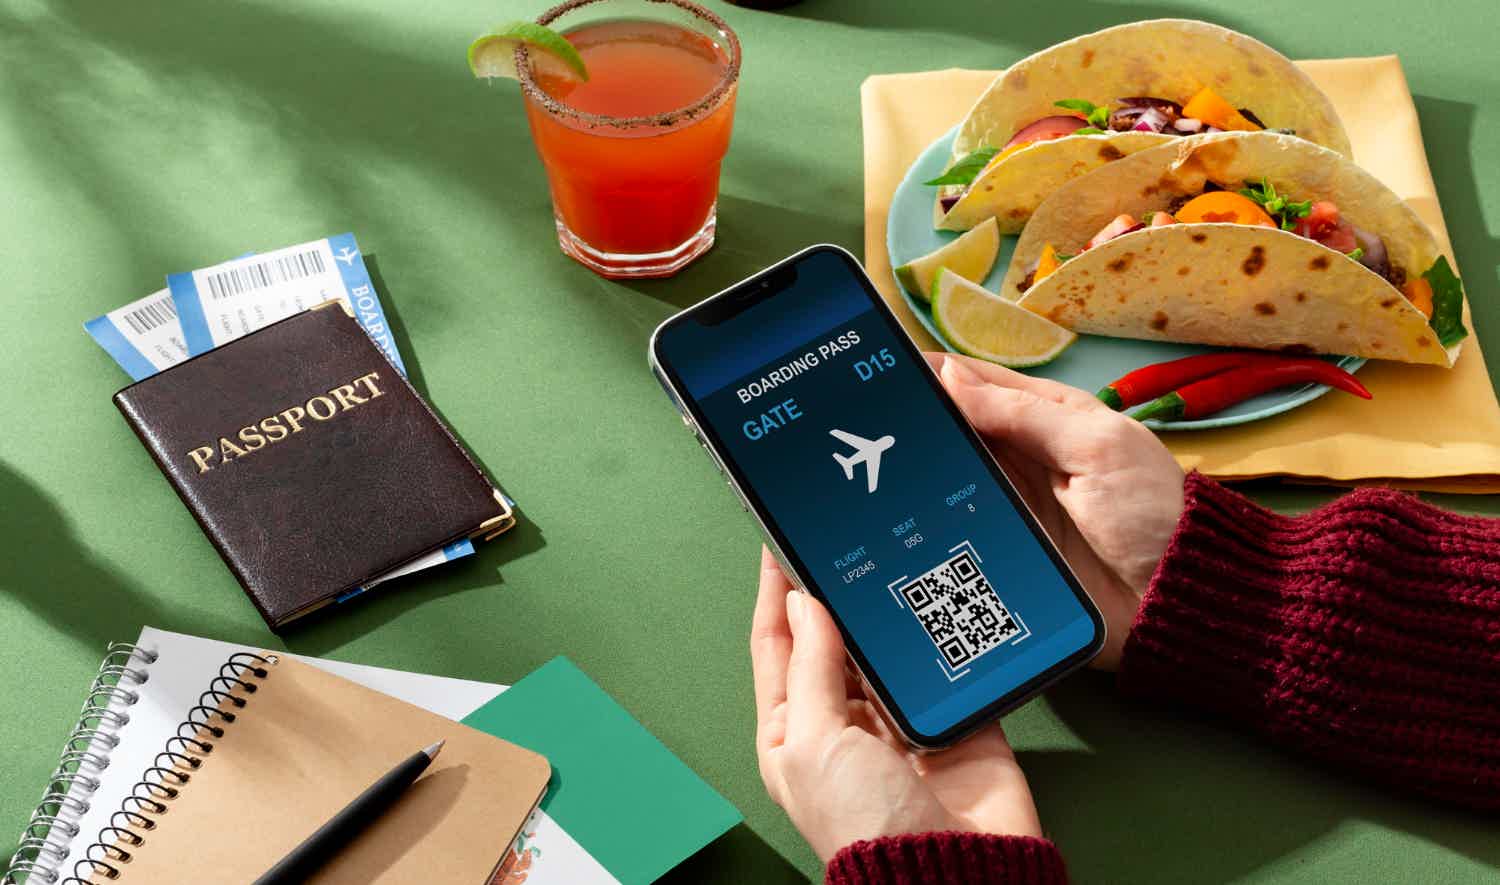 Your trip will get even better with this credit card. Source: Freepik.